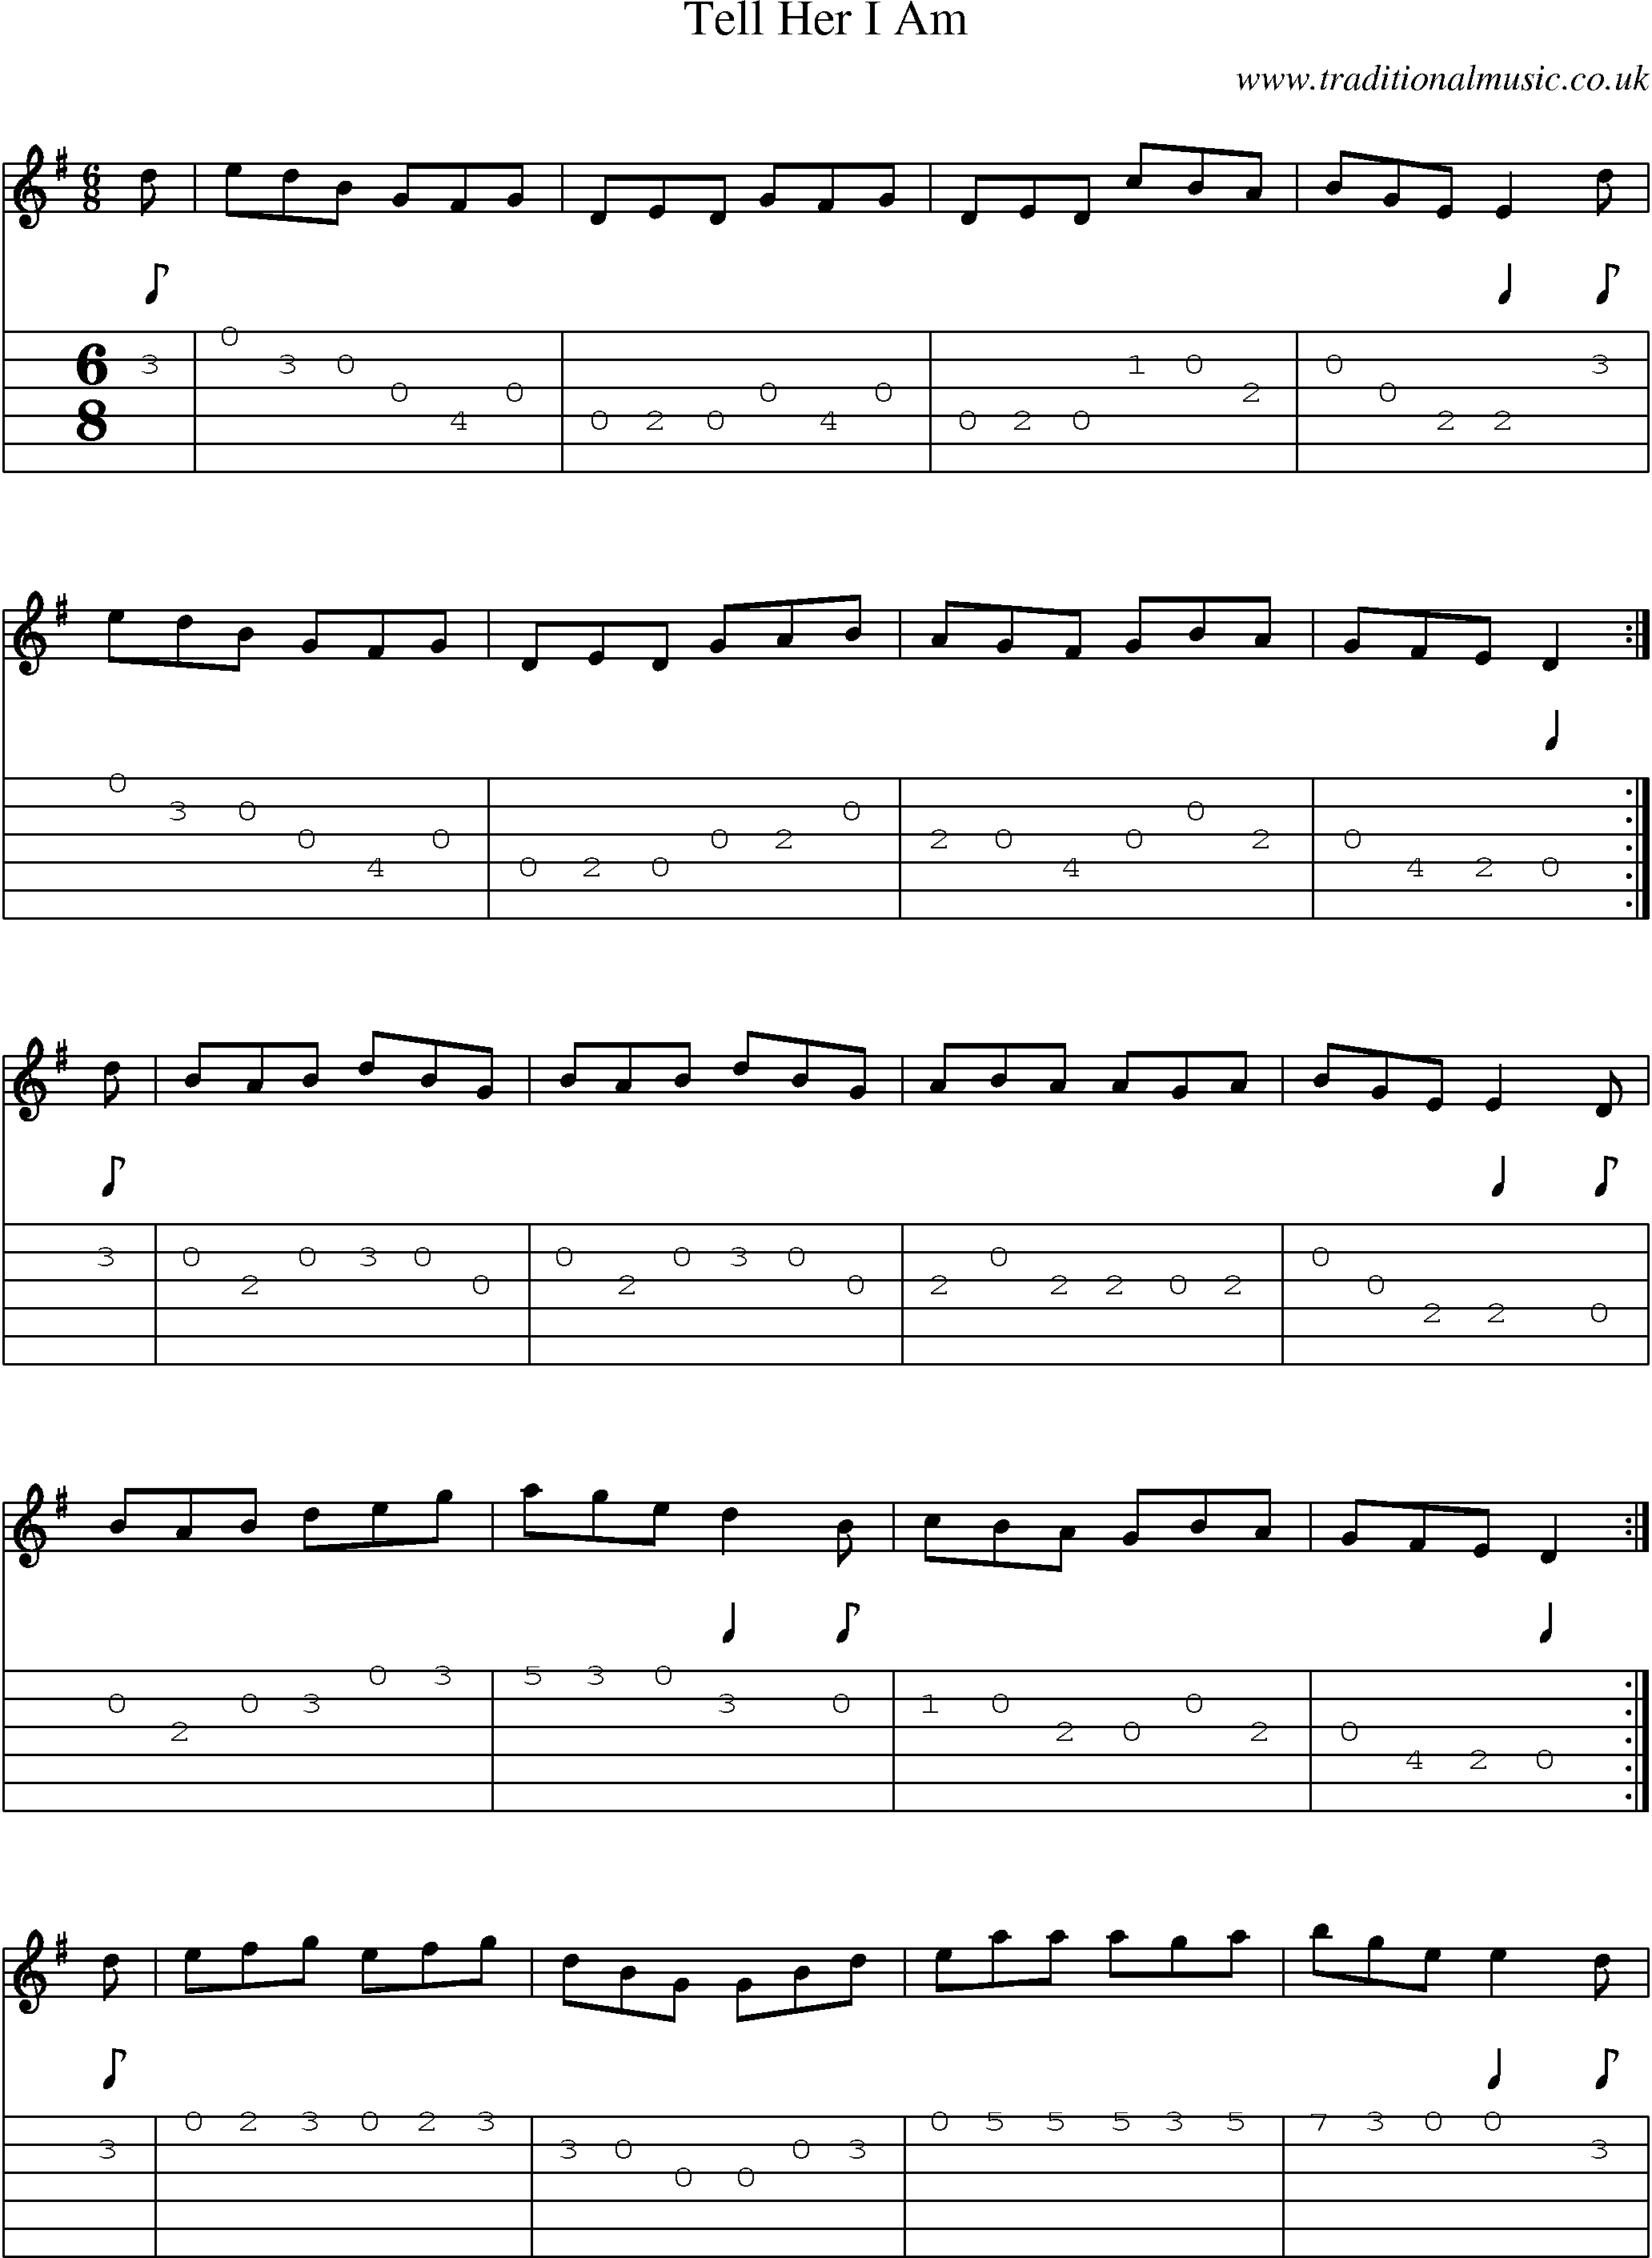 Music Score and Guitar Tabs for Tell Her I Am